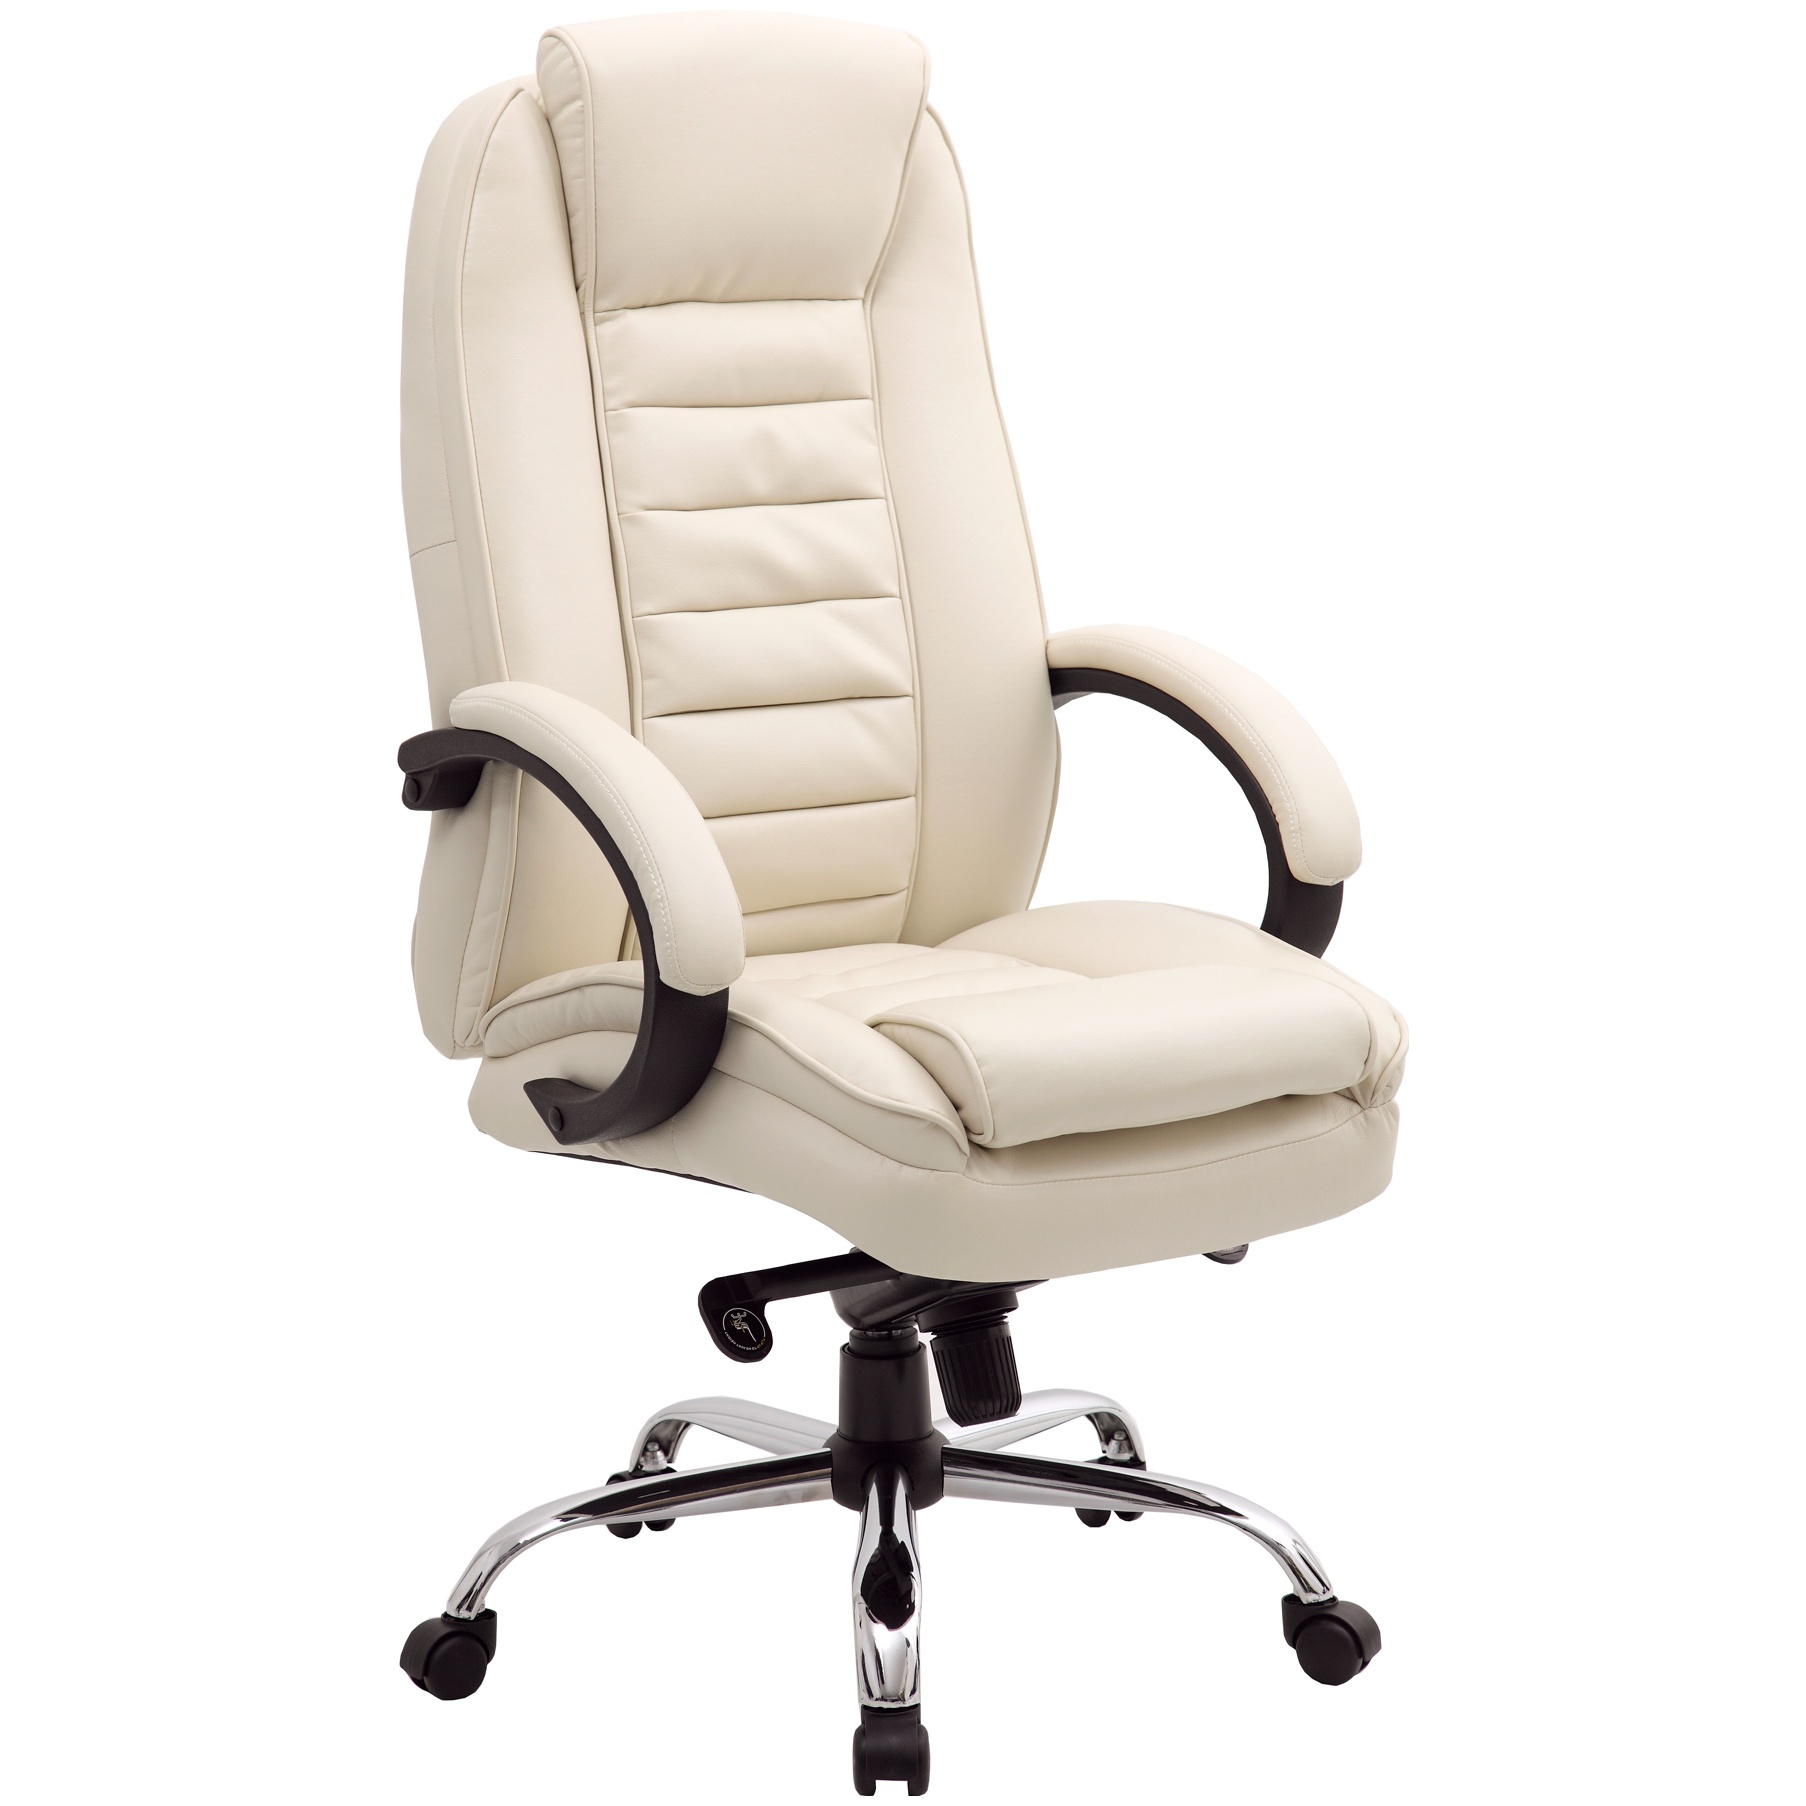 Lucca Cream Executive Leather Office Chairs | Executive Office Chairs